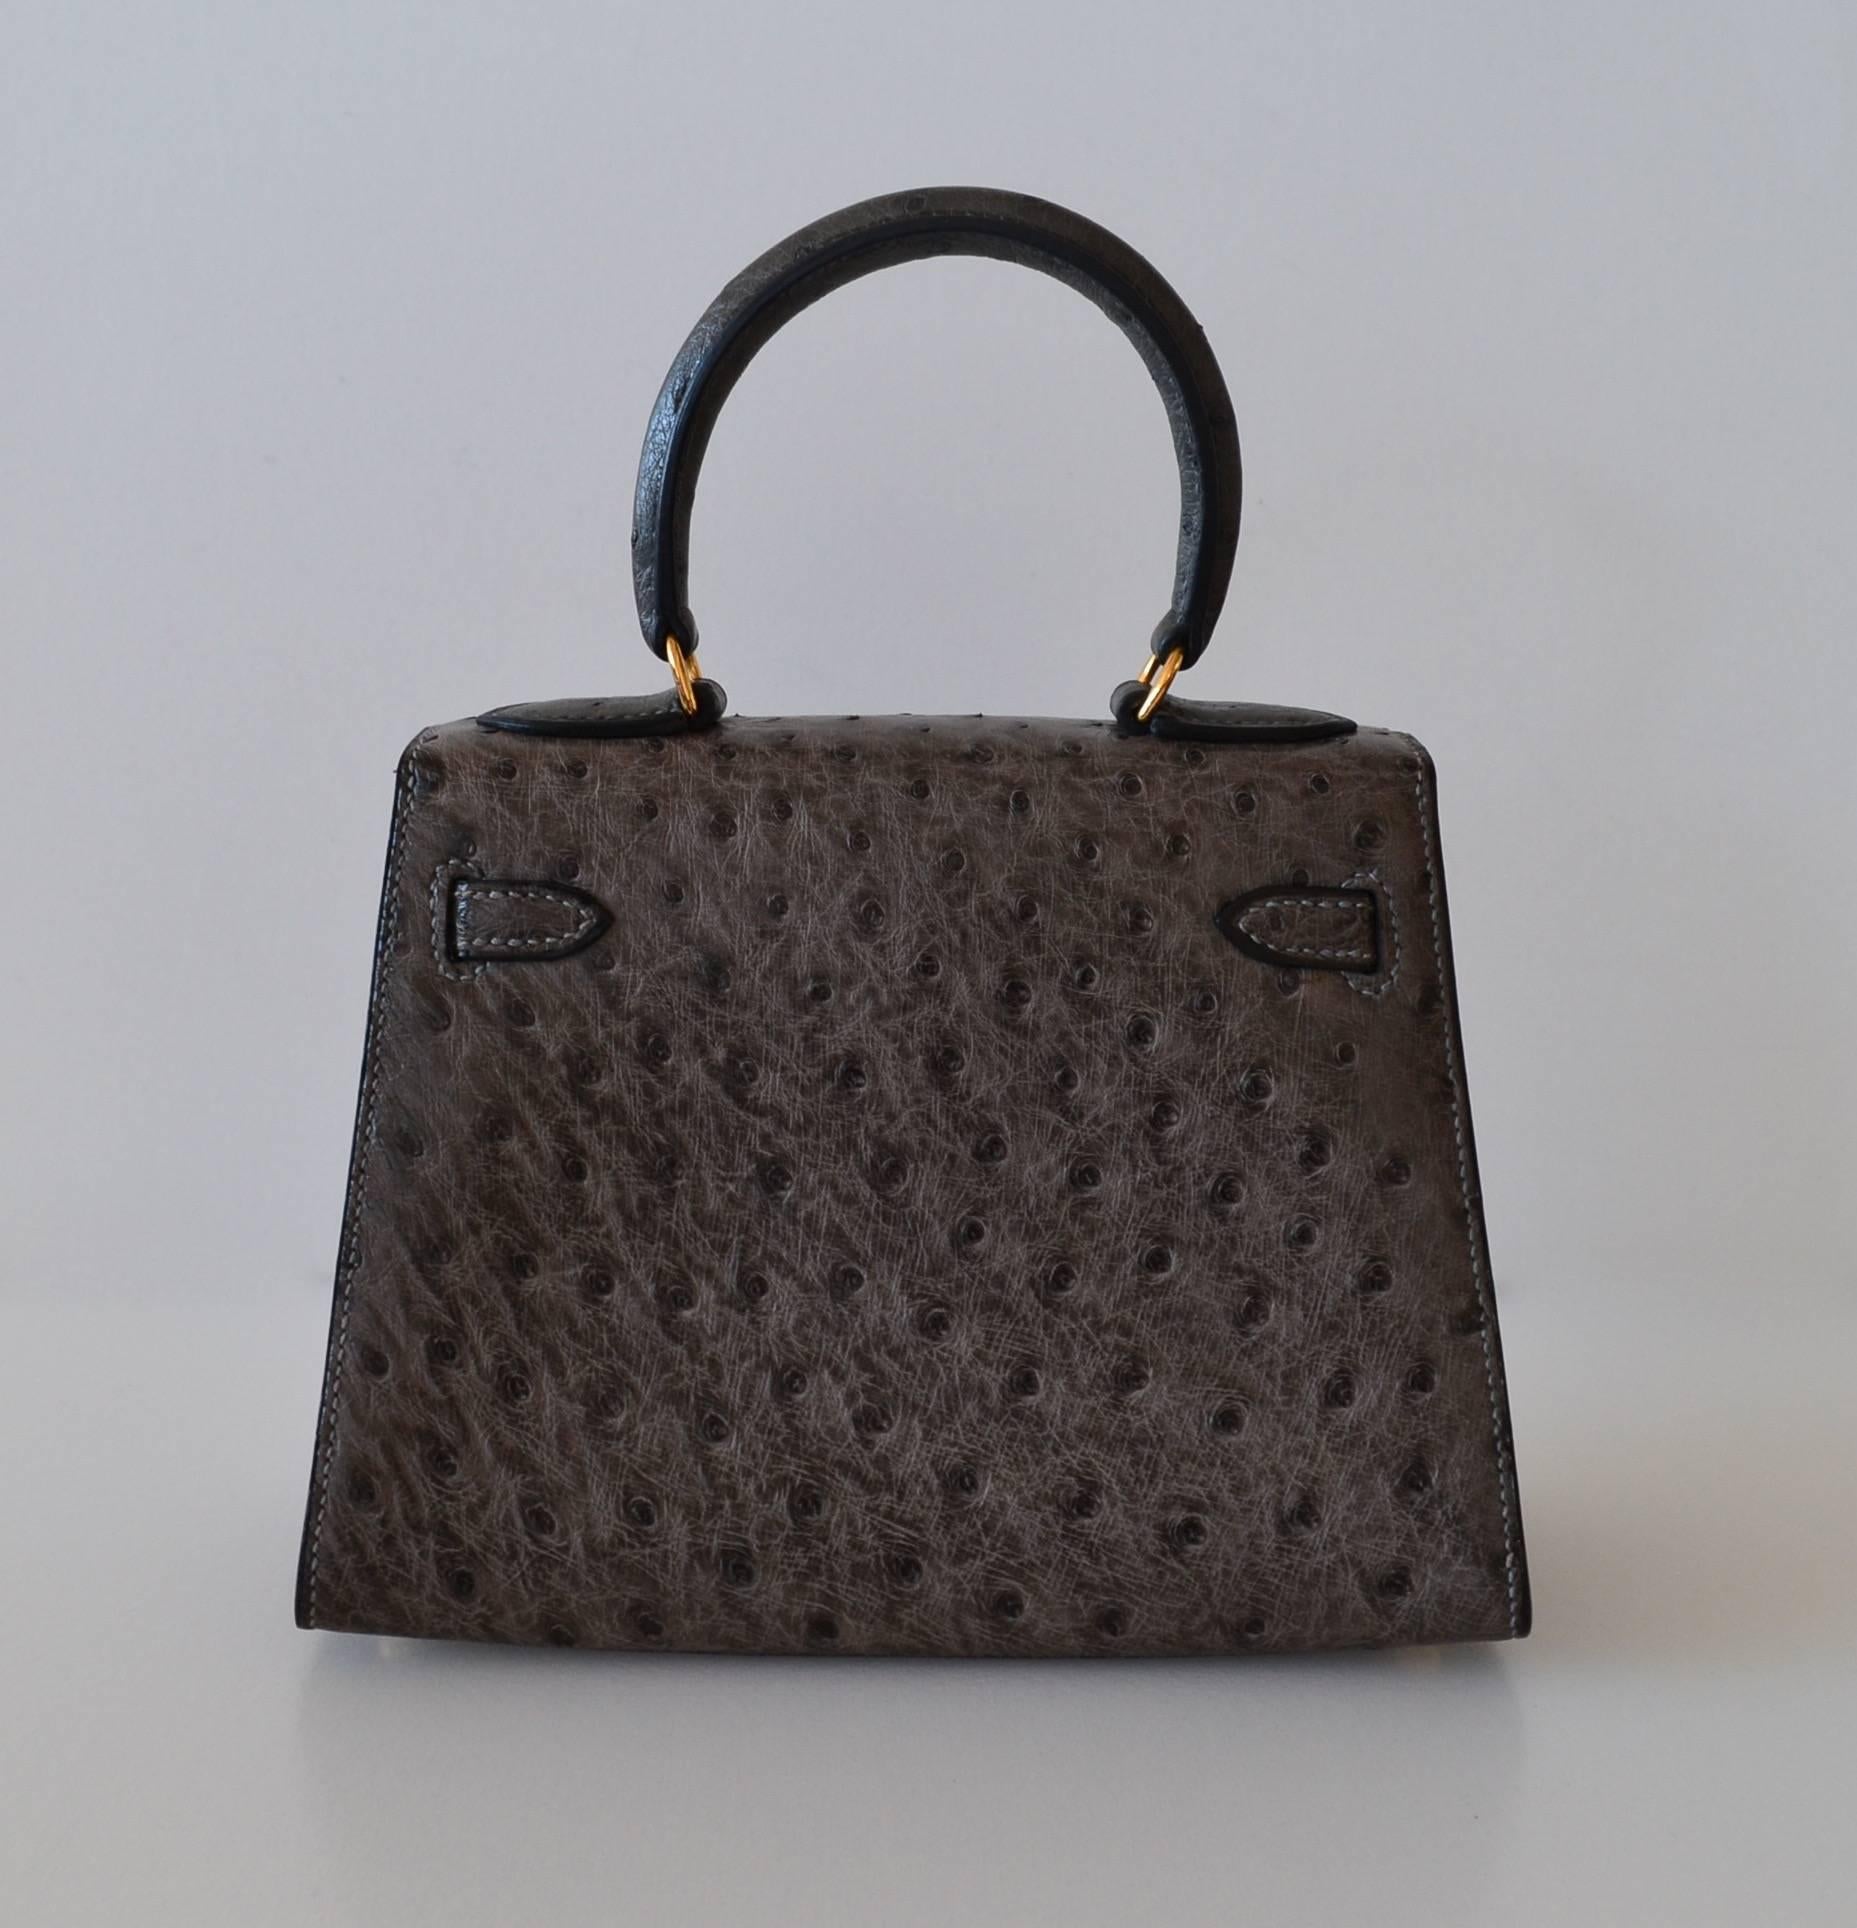 Hermès Kelly 20 Ostrich Sellier Anthracite
 
Rare Hermès Kelly 20 size handbag 
Ostrich Sellier in Anthracite color (grey)
 
Golden plated hardware
 
Excellent condition 8/10
Corners are excellent
Handle is perfect
Ostrich lining (very